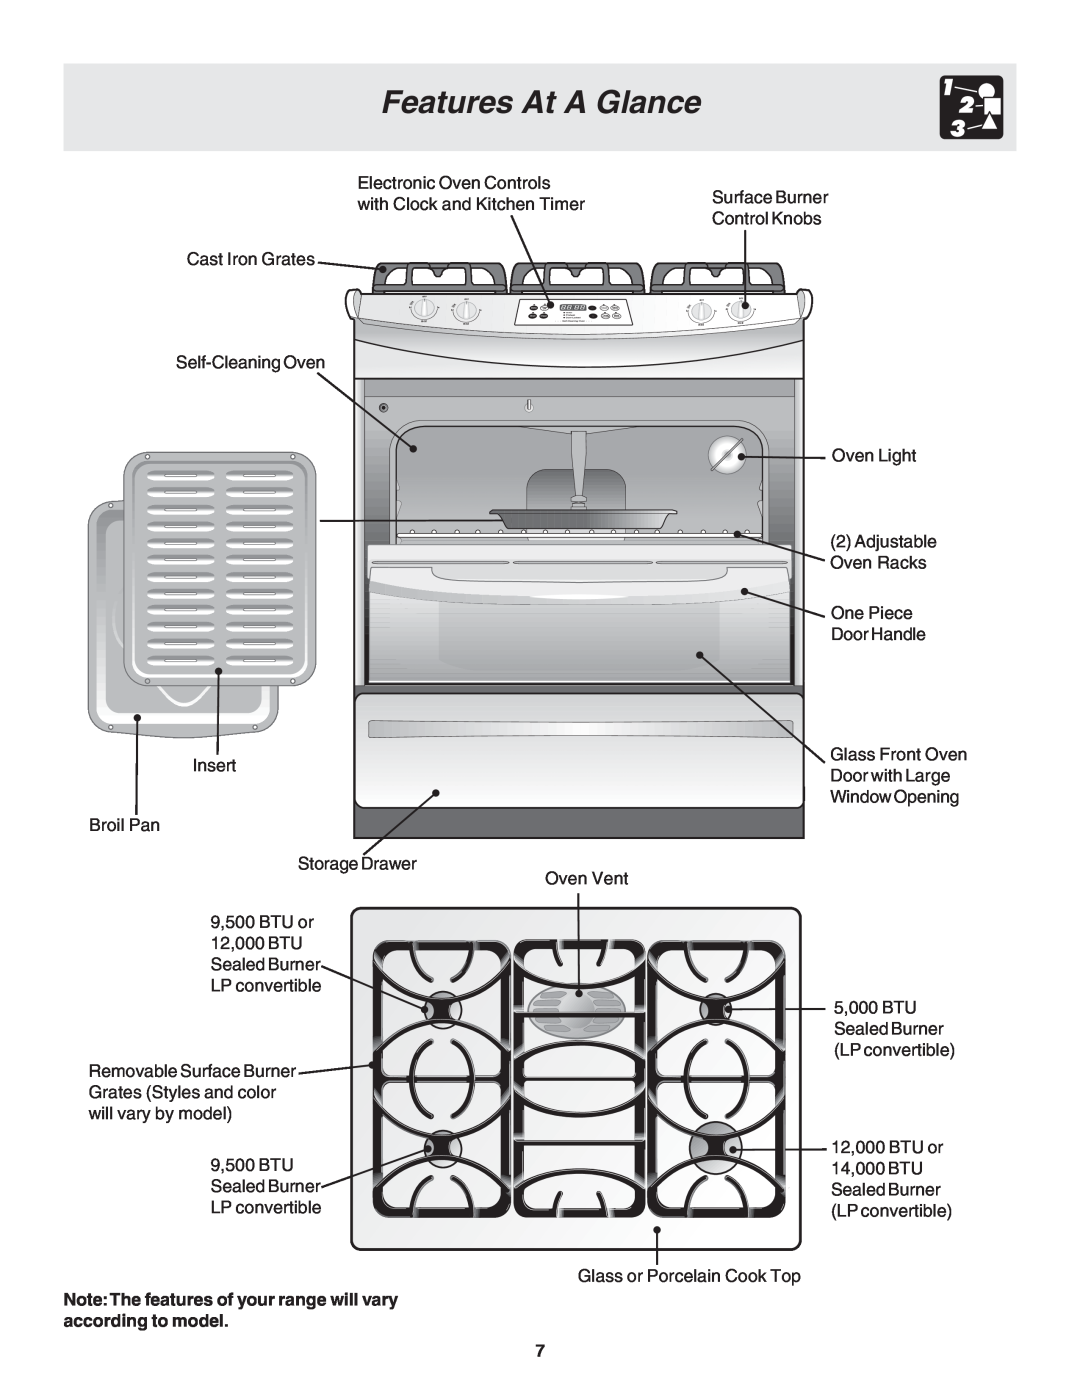 Frigidaire 318200880 manual Features At A Glance, NoteThe features of your range will vary according to model 